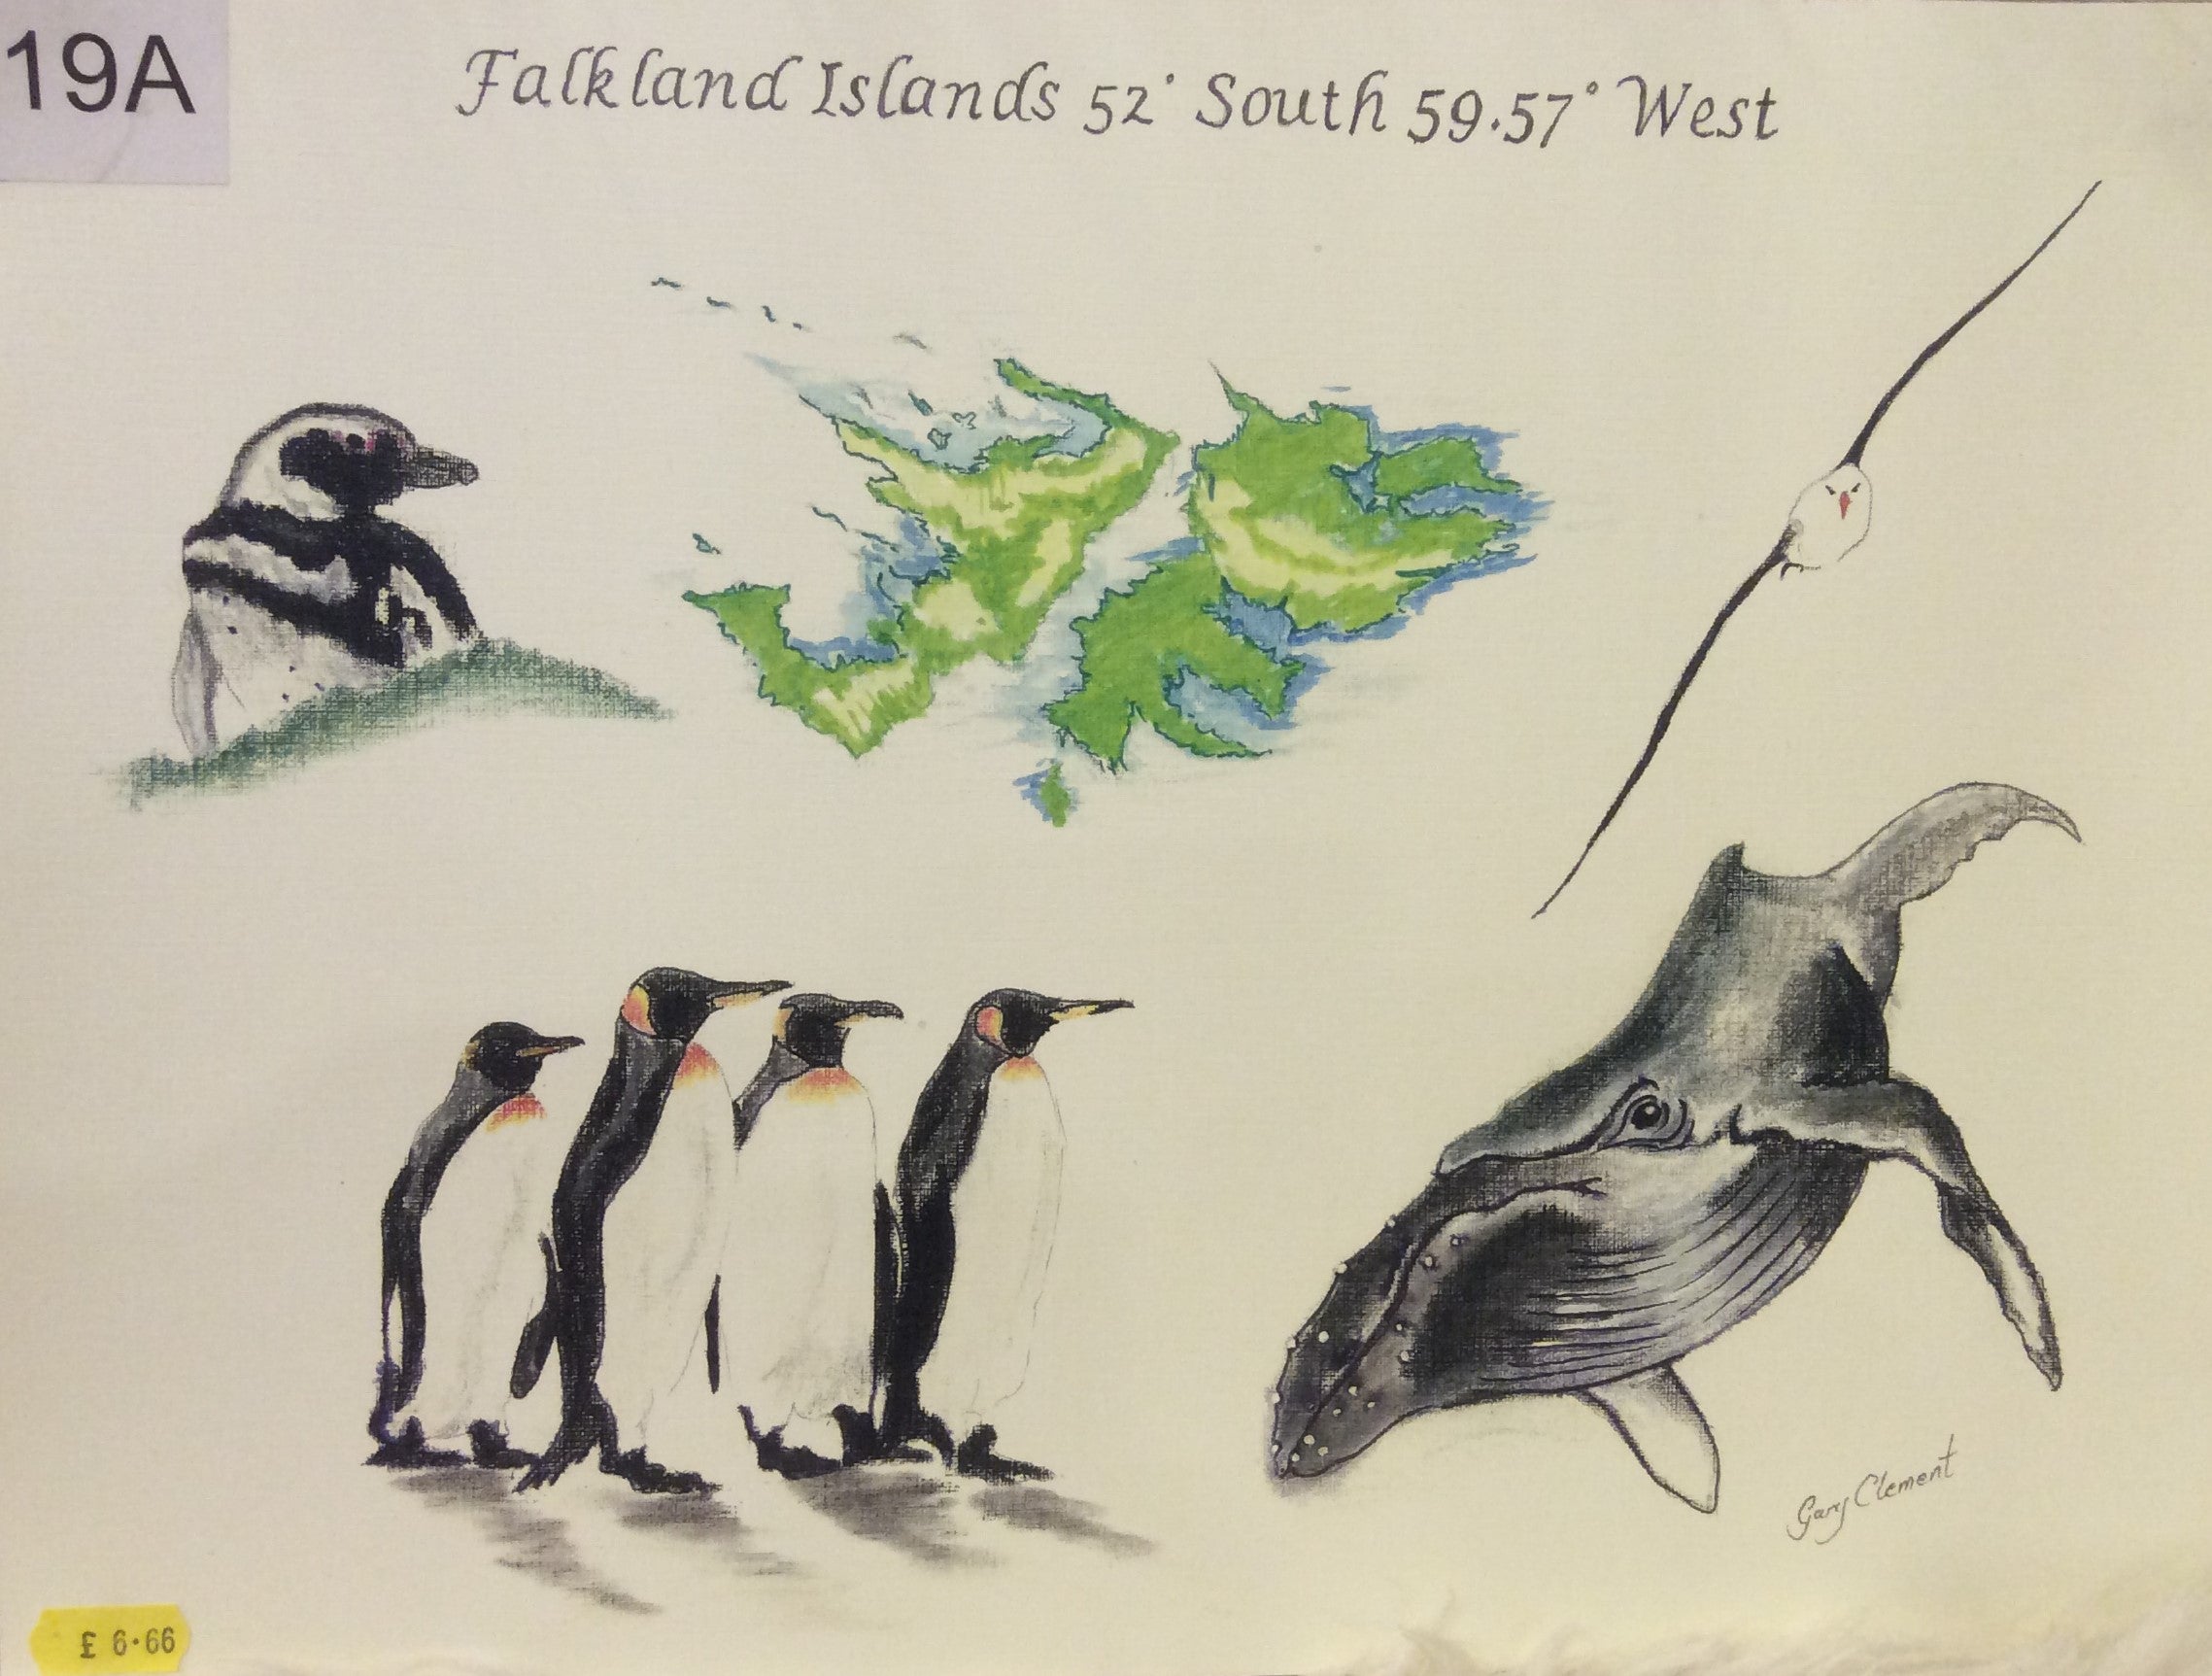 Falkland Island Print by Gary Clement